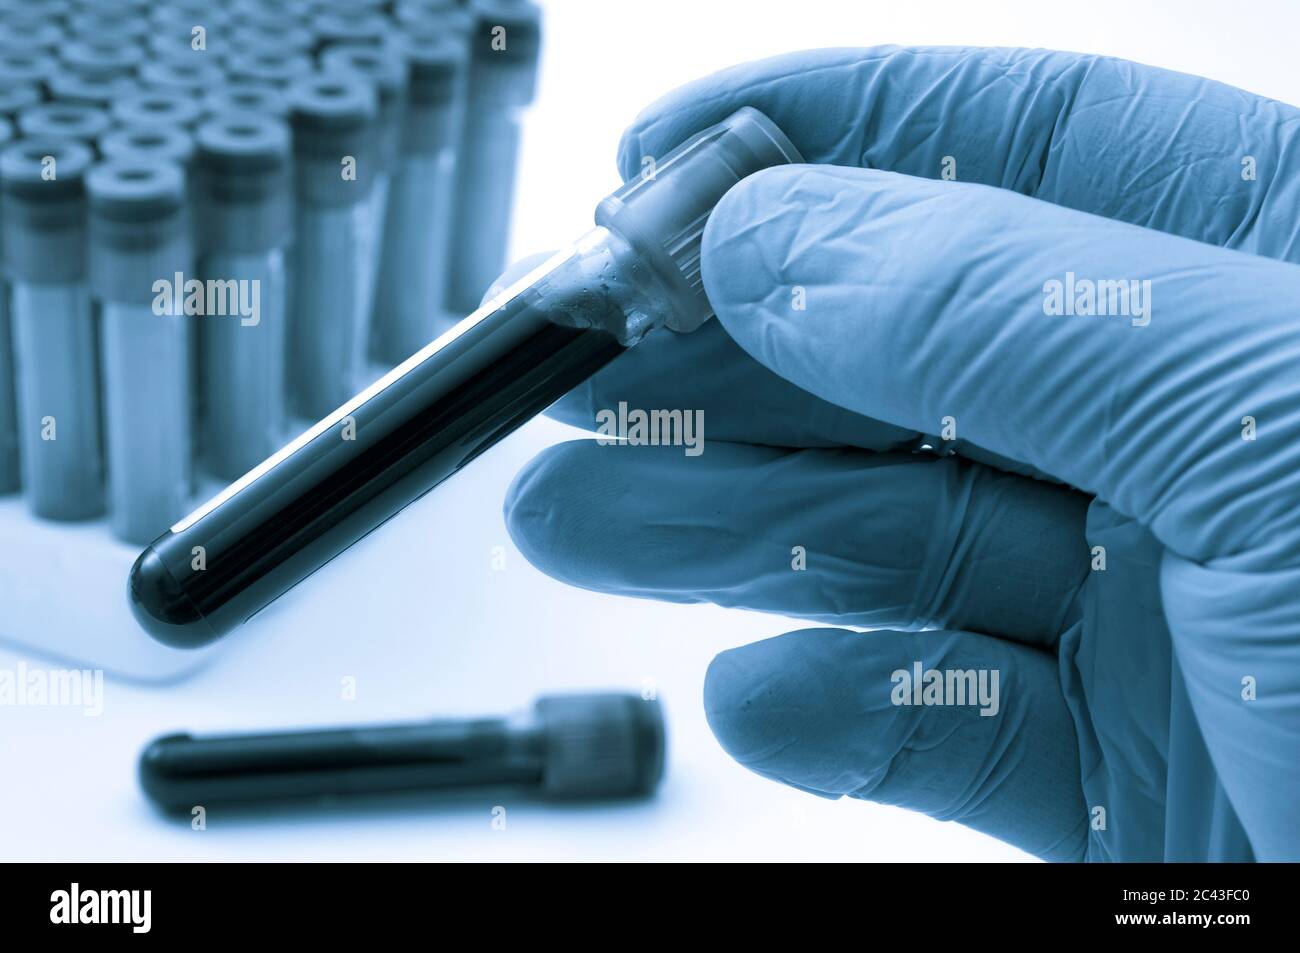 Blood analysis, clinical or medical testing and phlebotomy concept theme with close up on doctor hand wearing blue latex gloves and holding a test tub Stock Photo